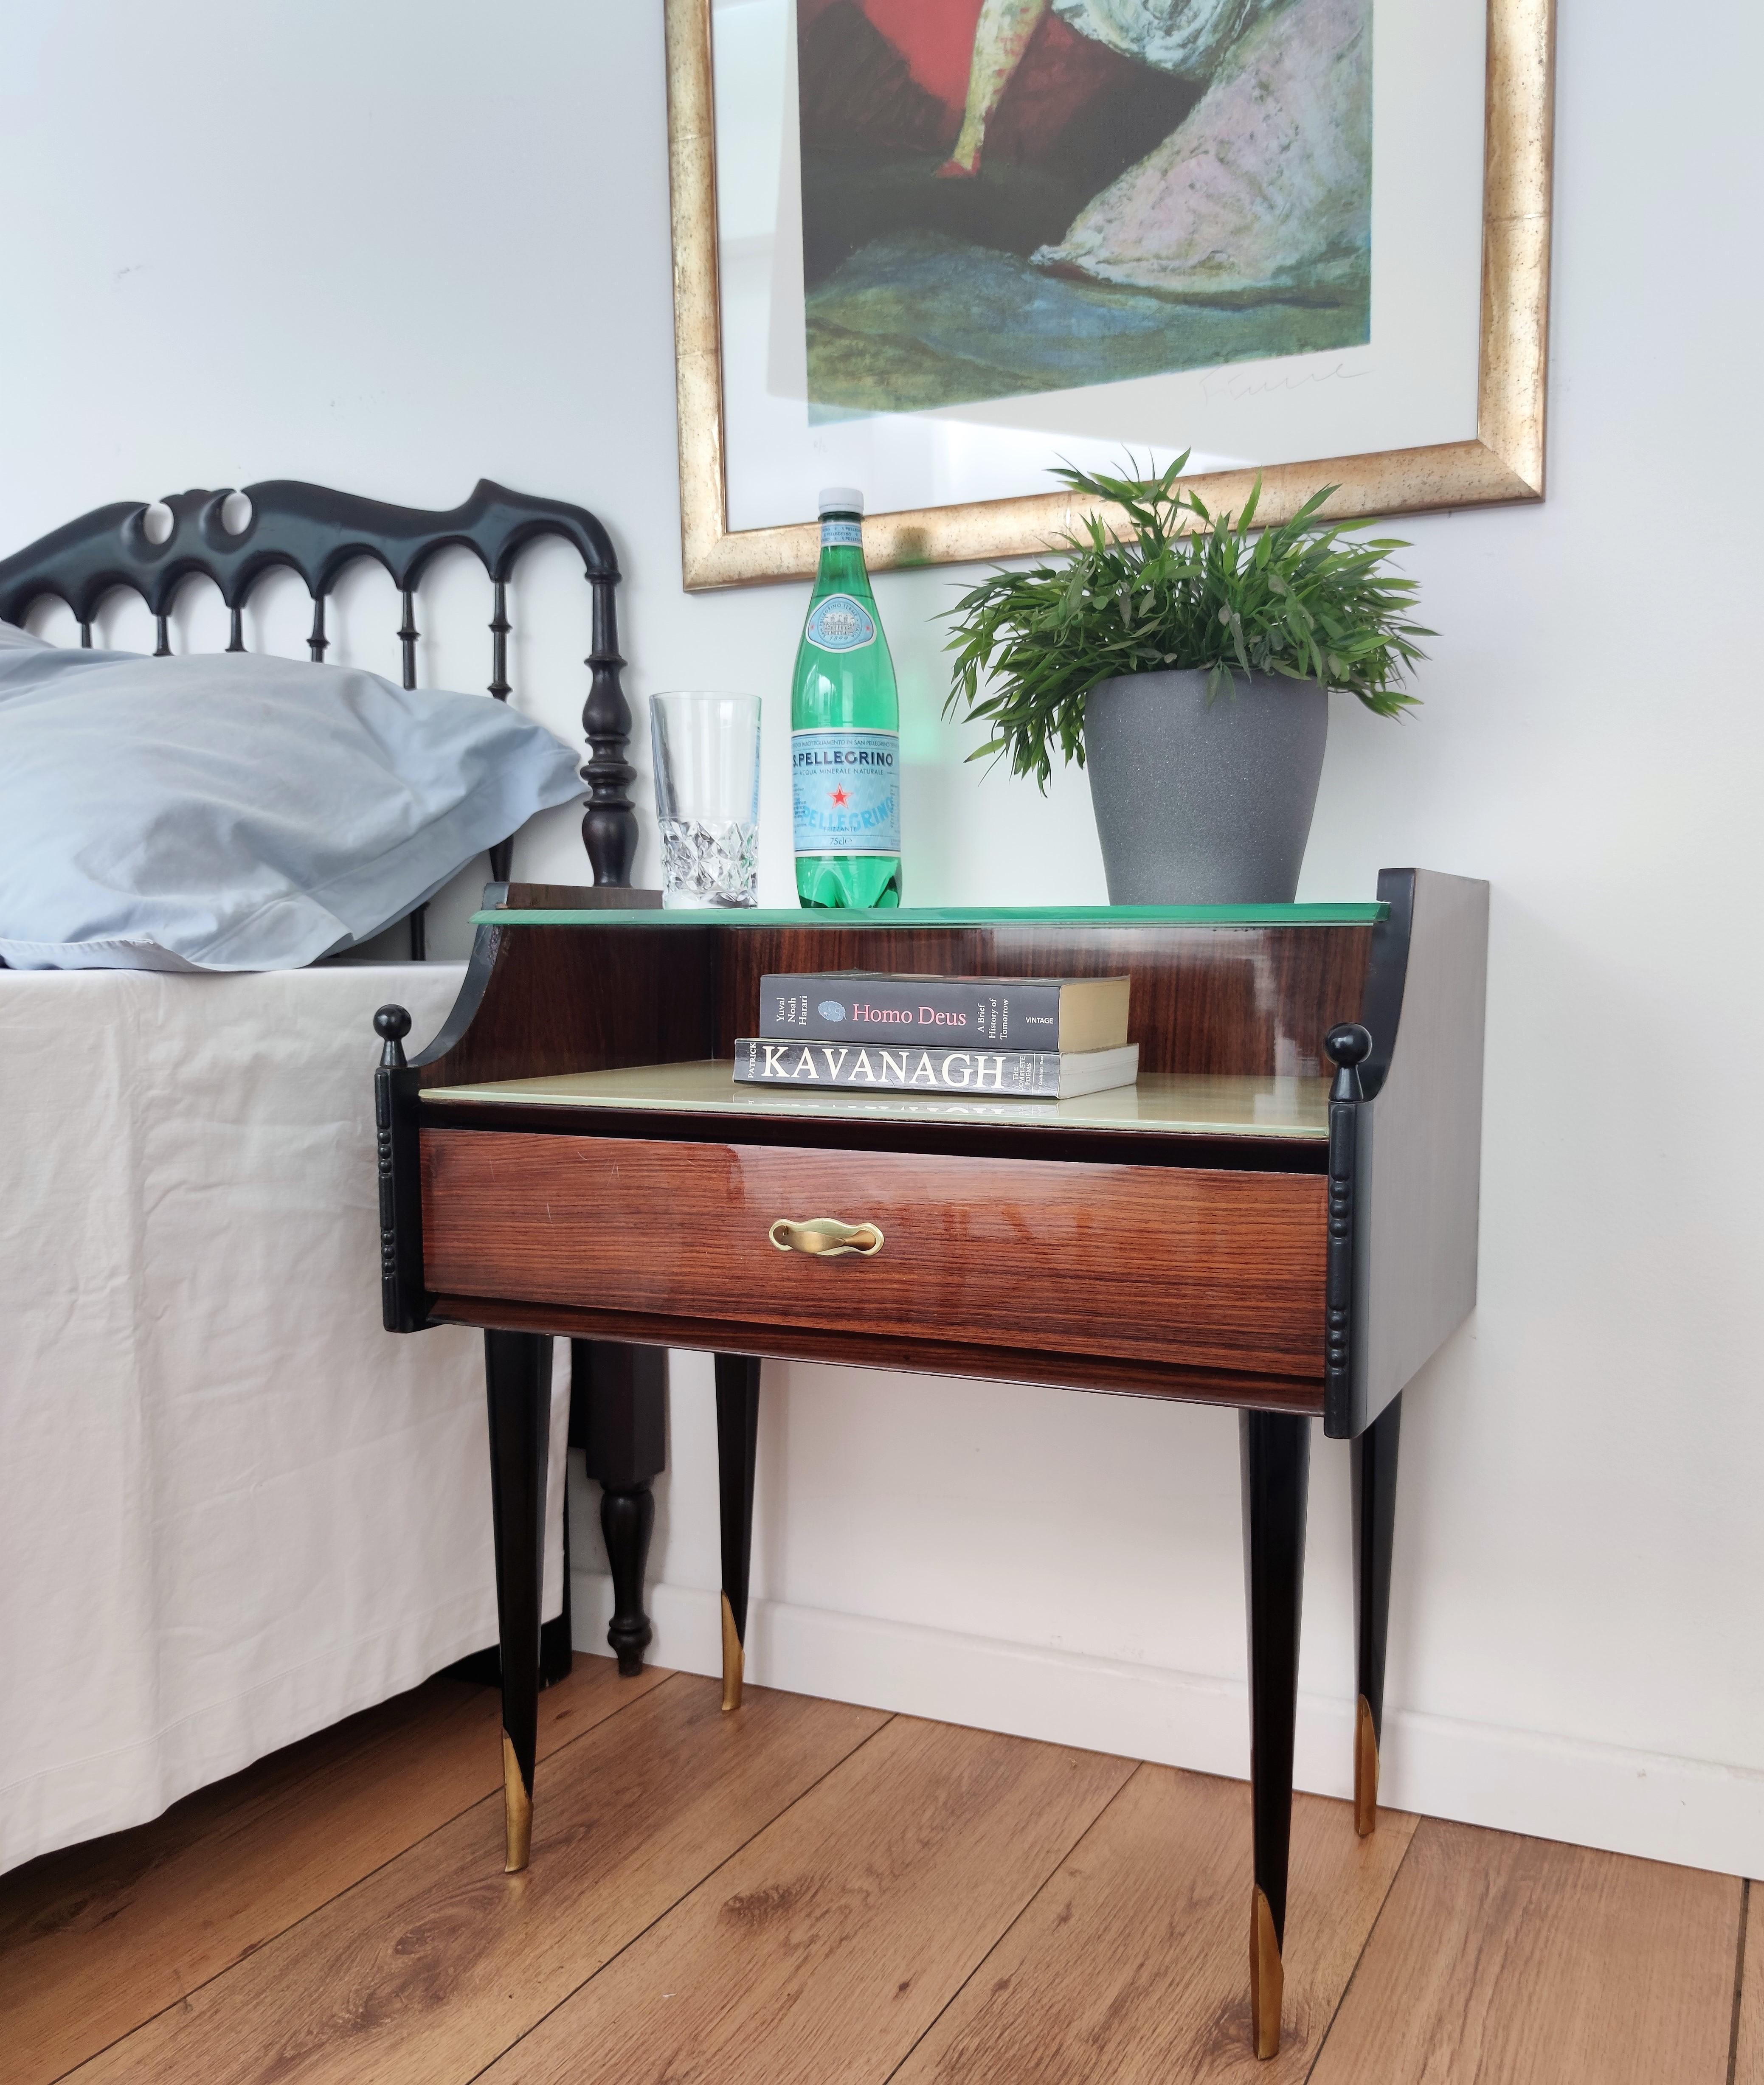 Very elegant and refined Italian 1950s Mid-Century Modern pair of bedside tables with walnut veneer wood front drawer, lacquered glass and second glass top with brass details such as the handles and decorated frame and legs. Those nightstands make a